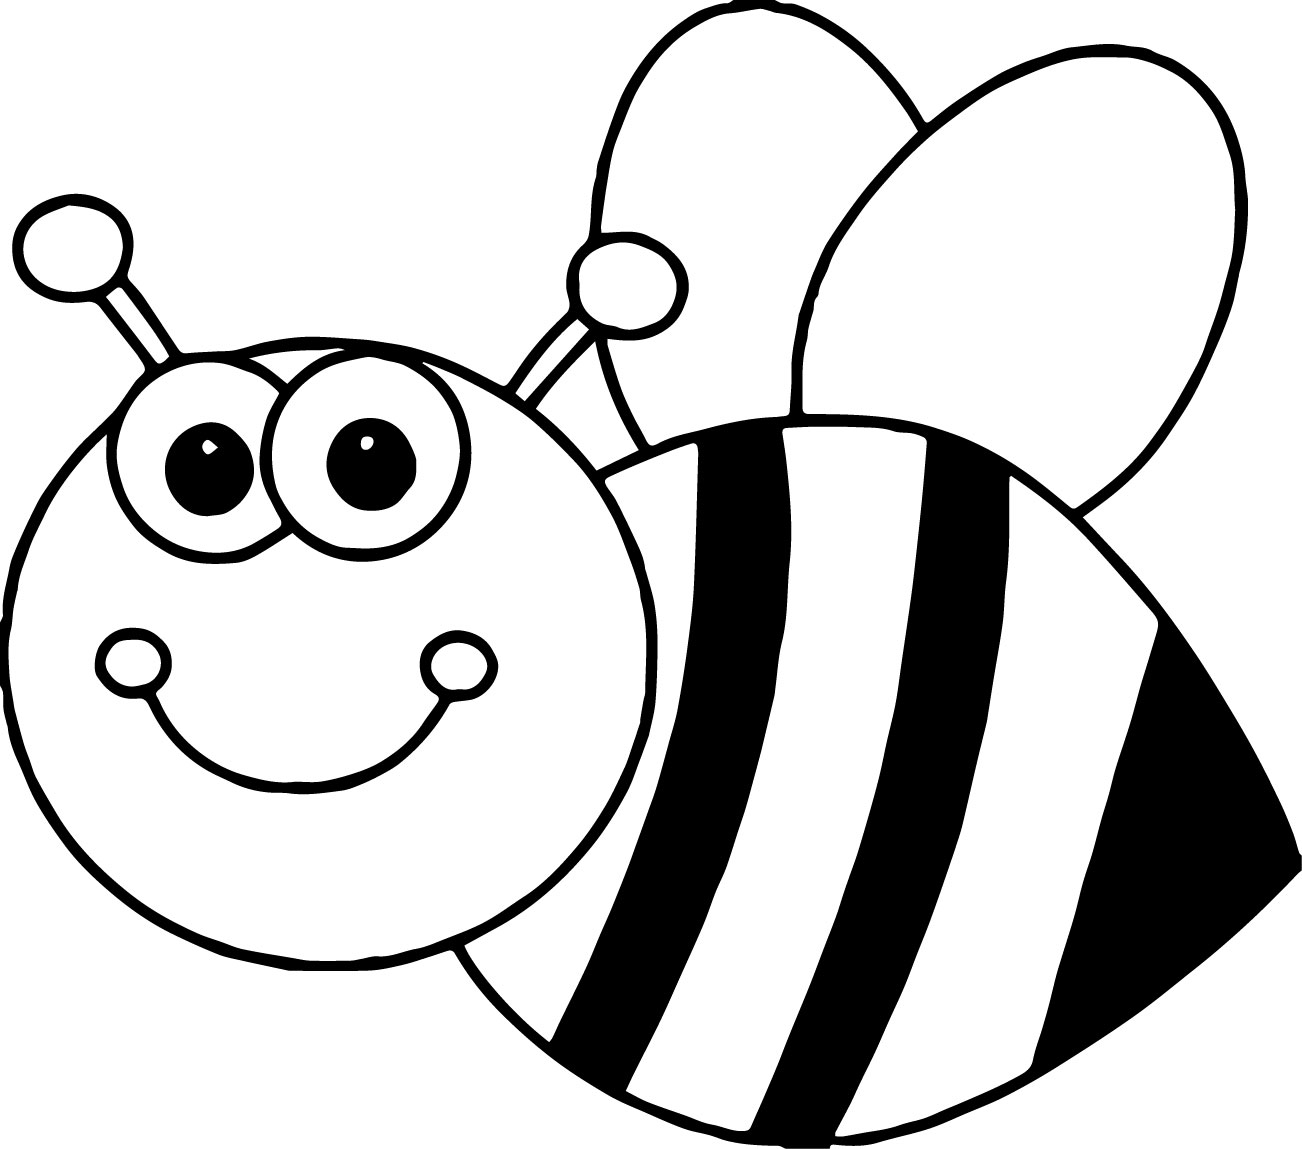 Cut Out Bumble Bee Template Printable